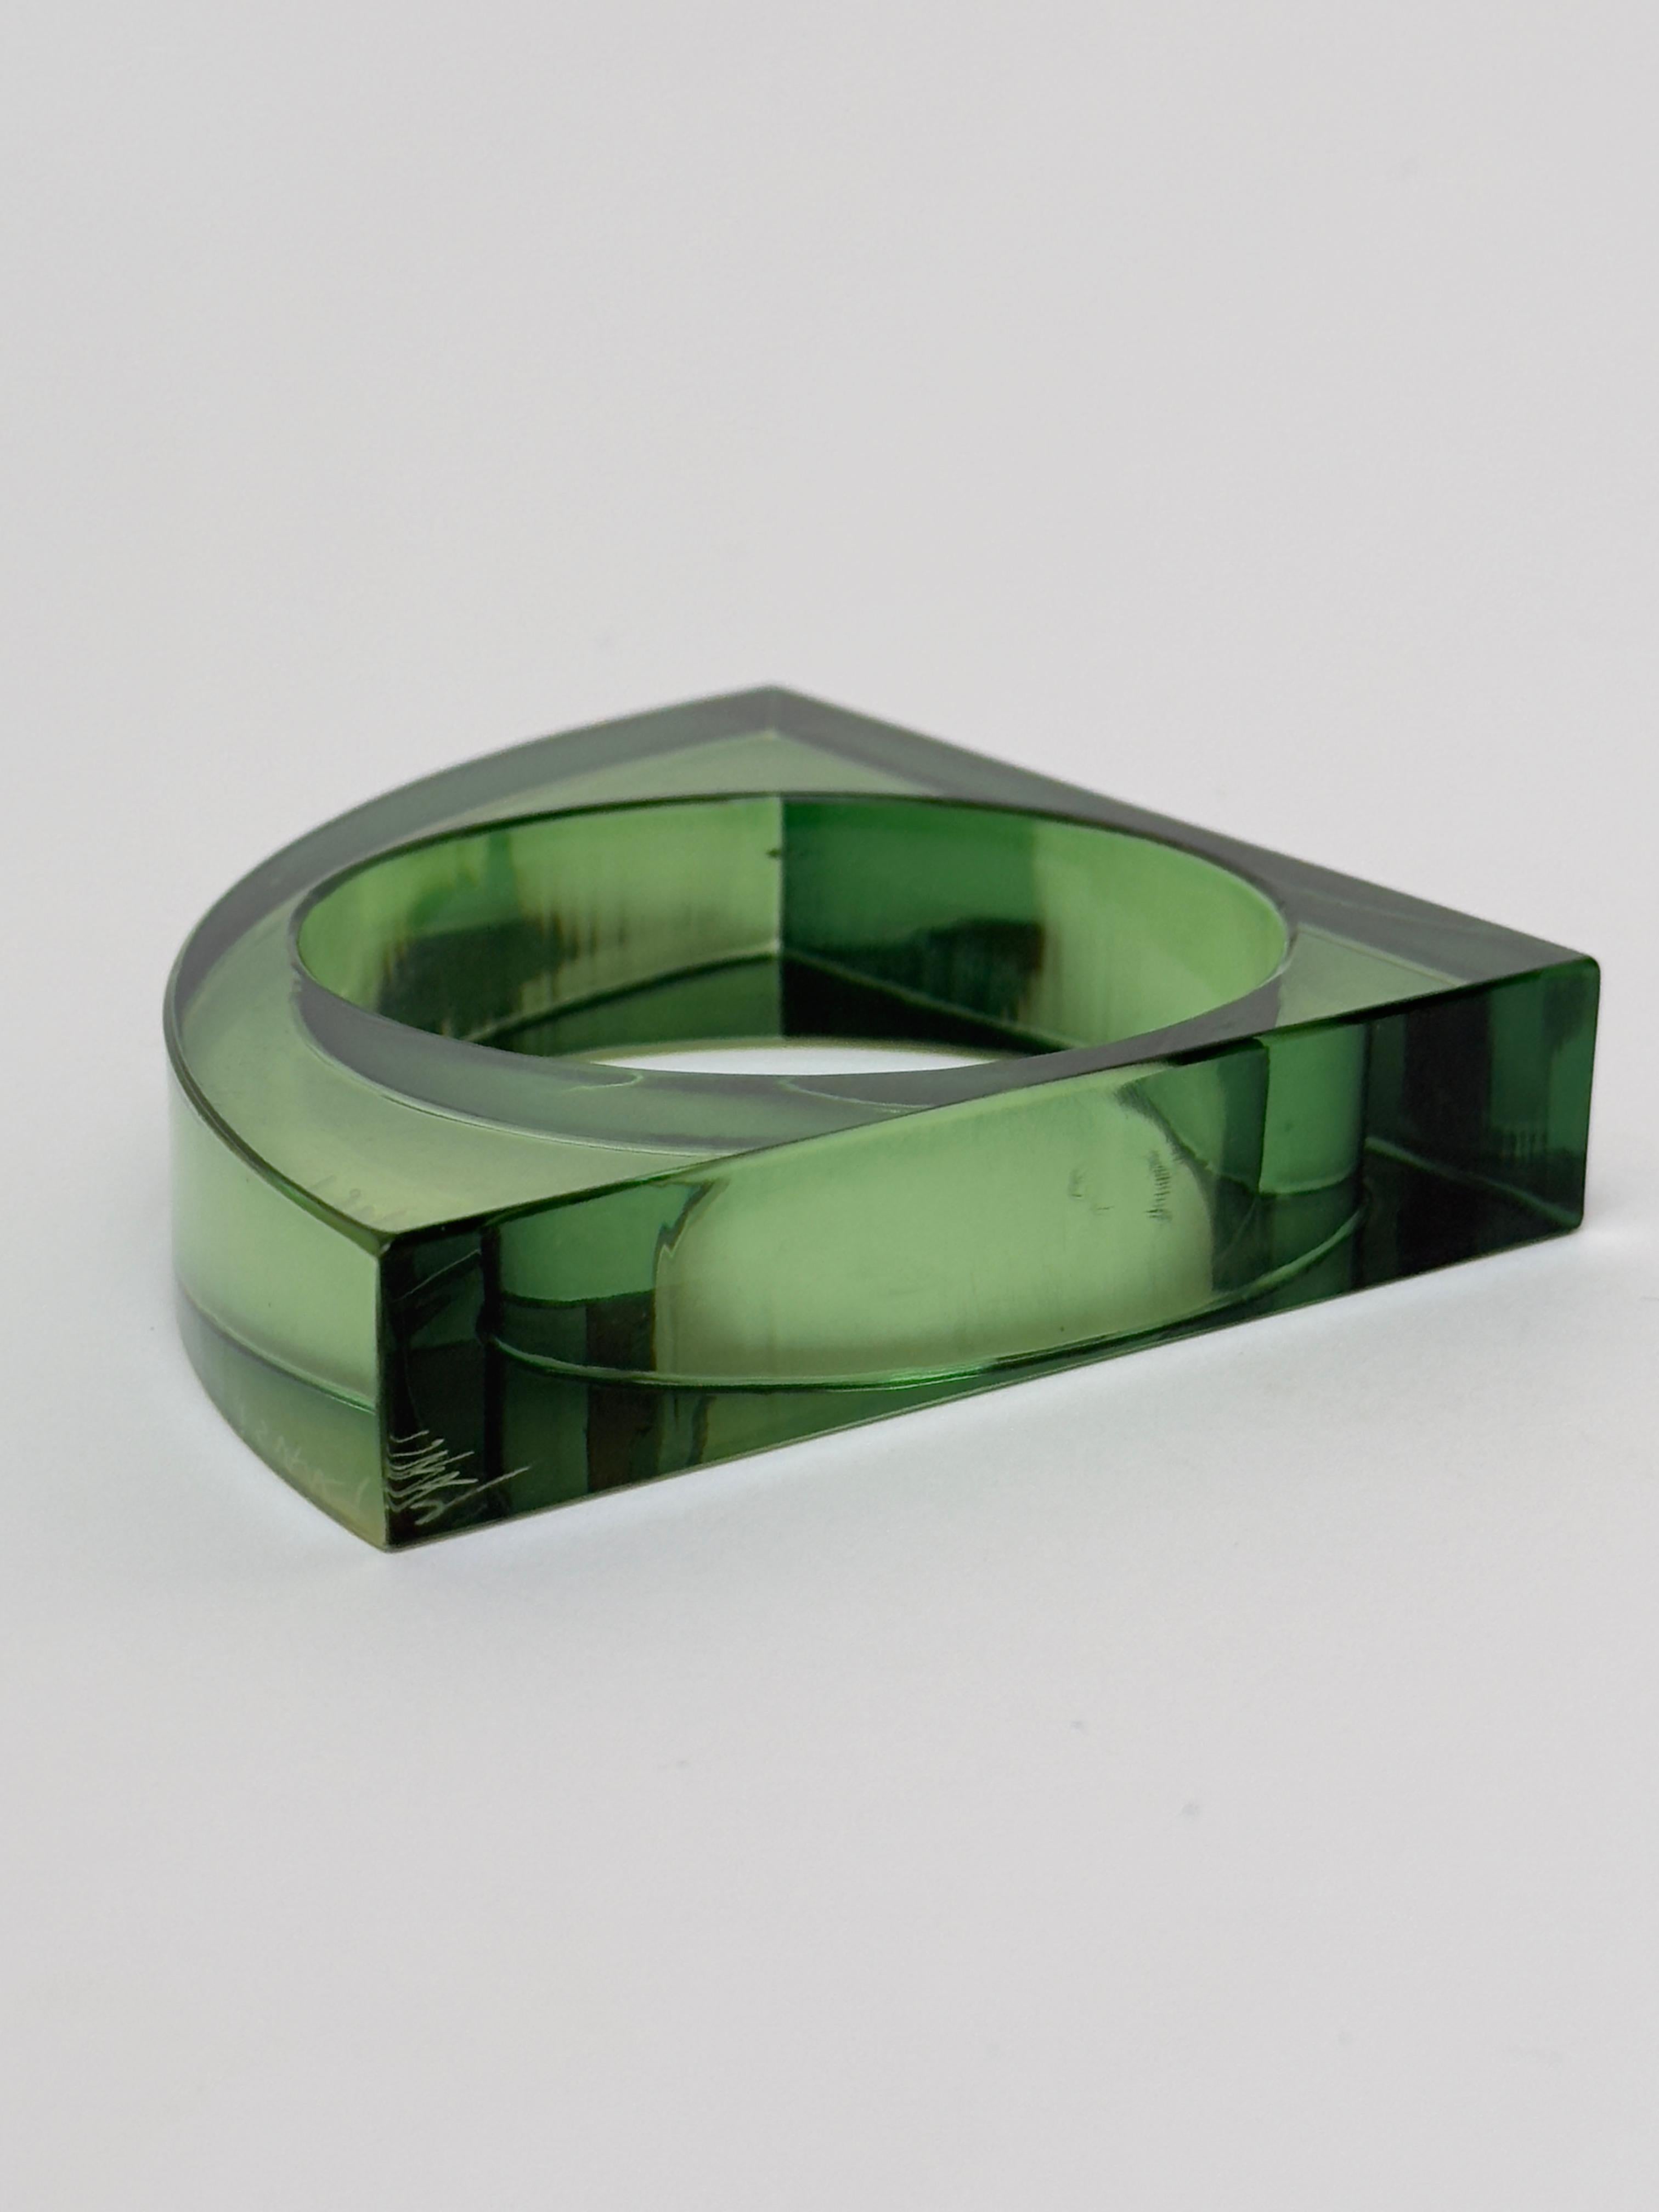 Molded Large Plexiglass Cuff, Isaky, Paris c. 1980 For Sale